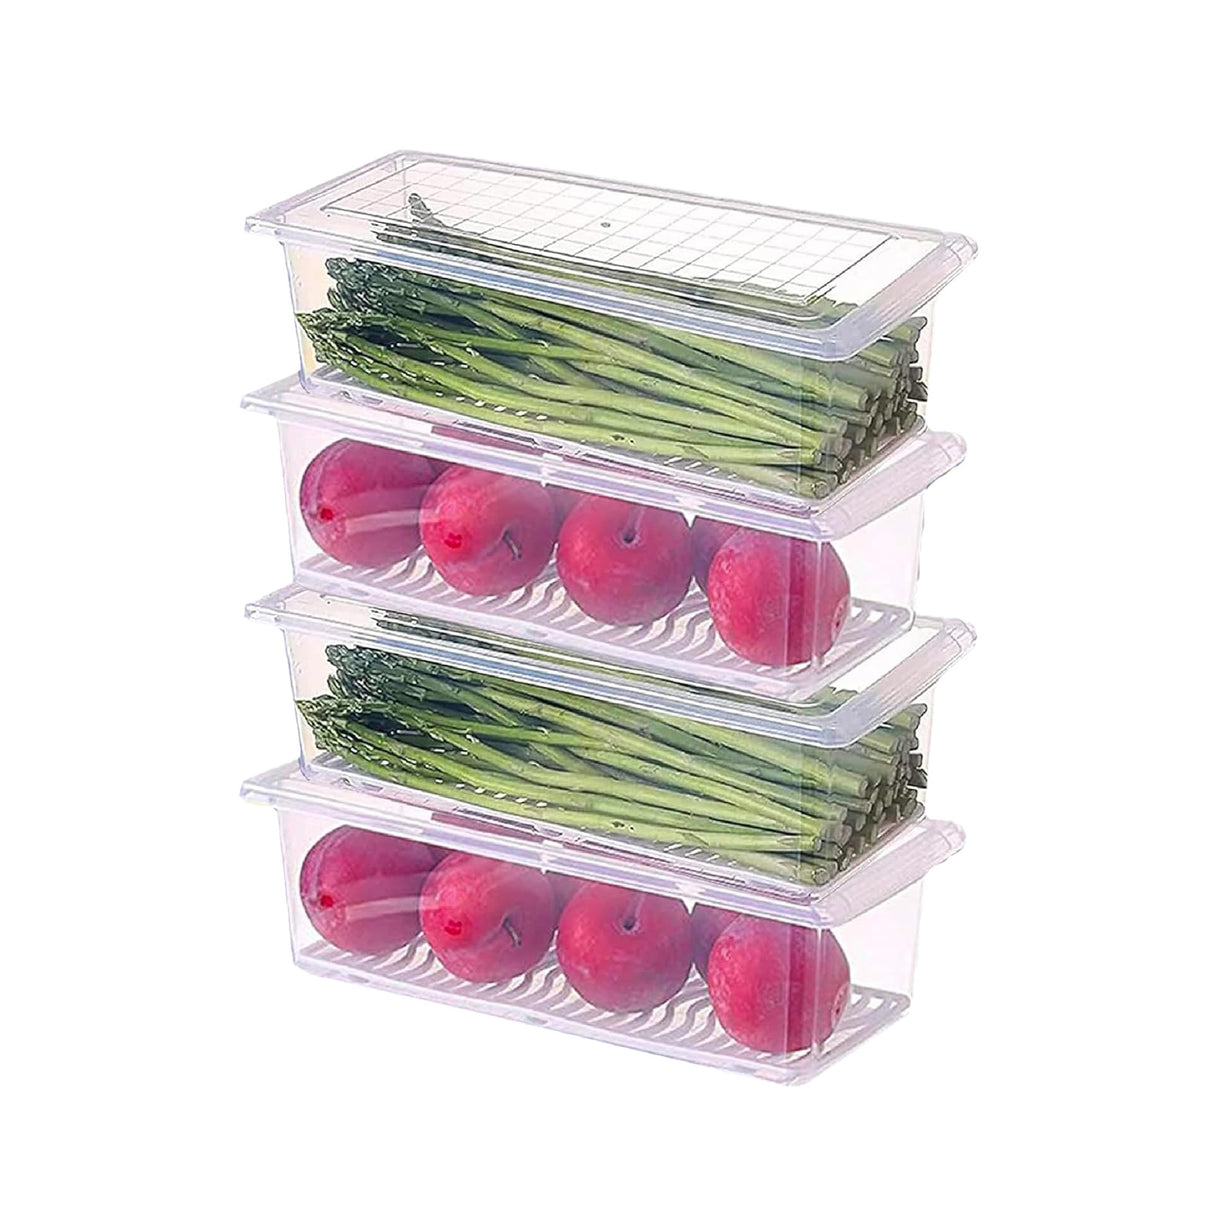 Fridge storage box for fruits and vegetables